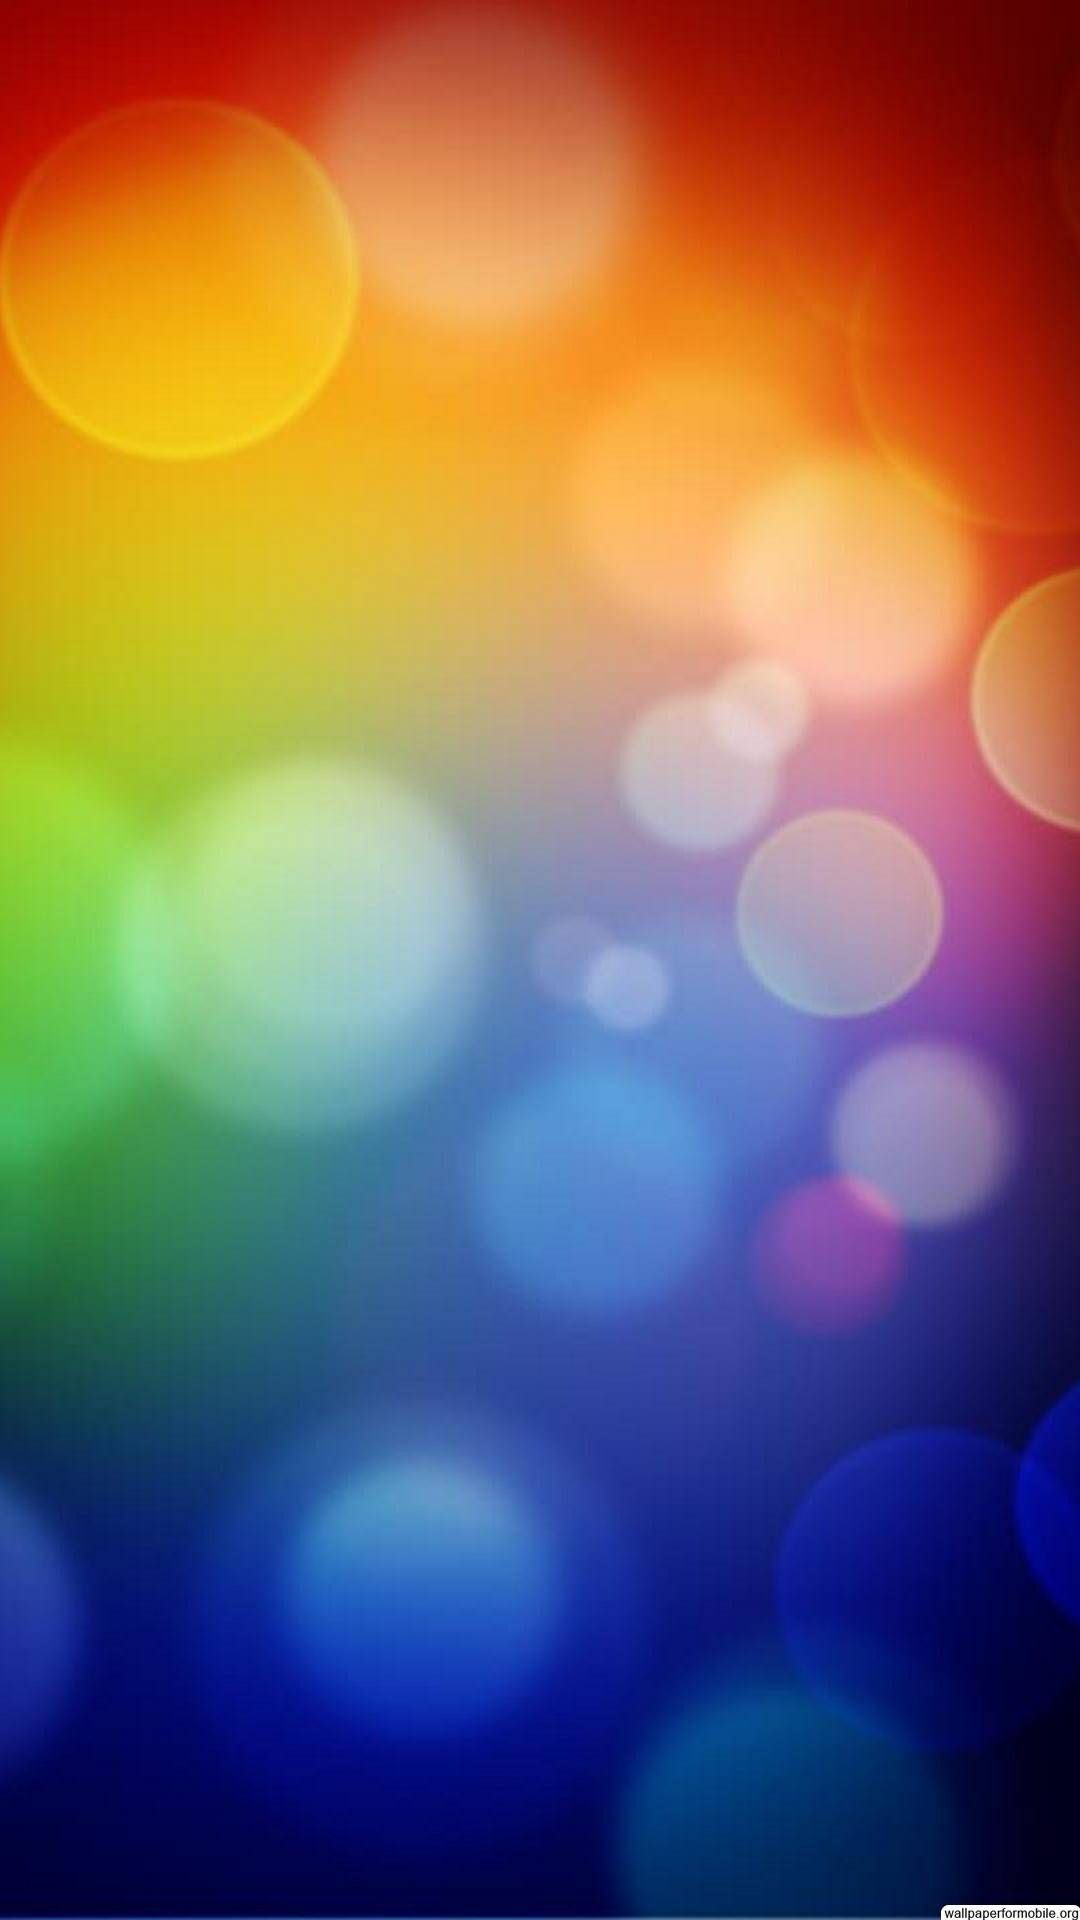 iPod Touch Wallpaper Free iPod Touch Background